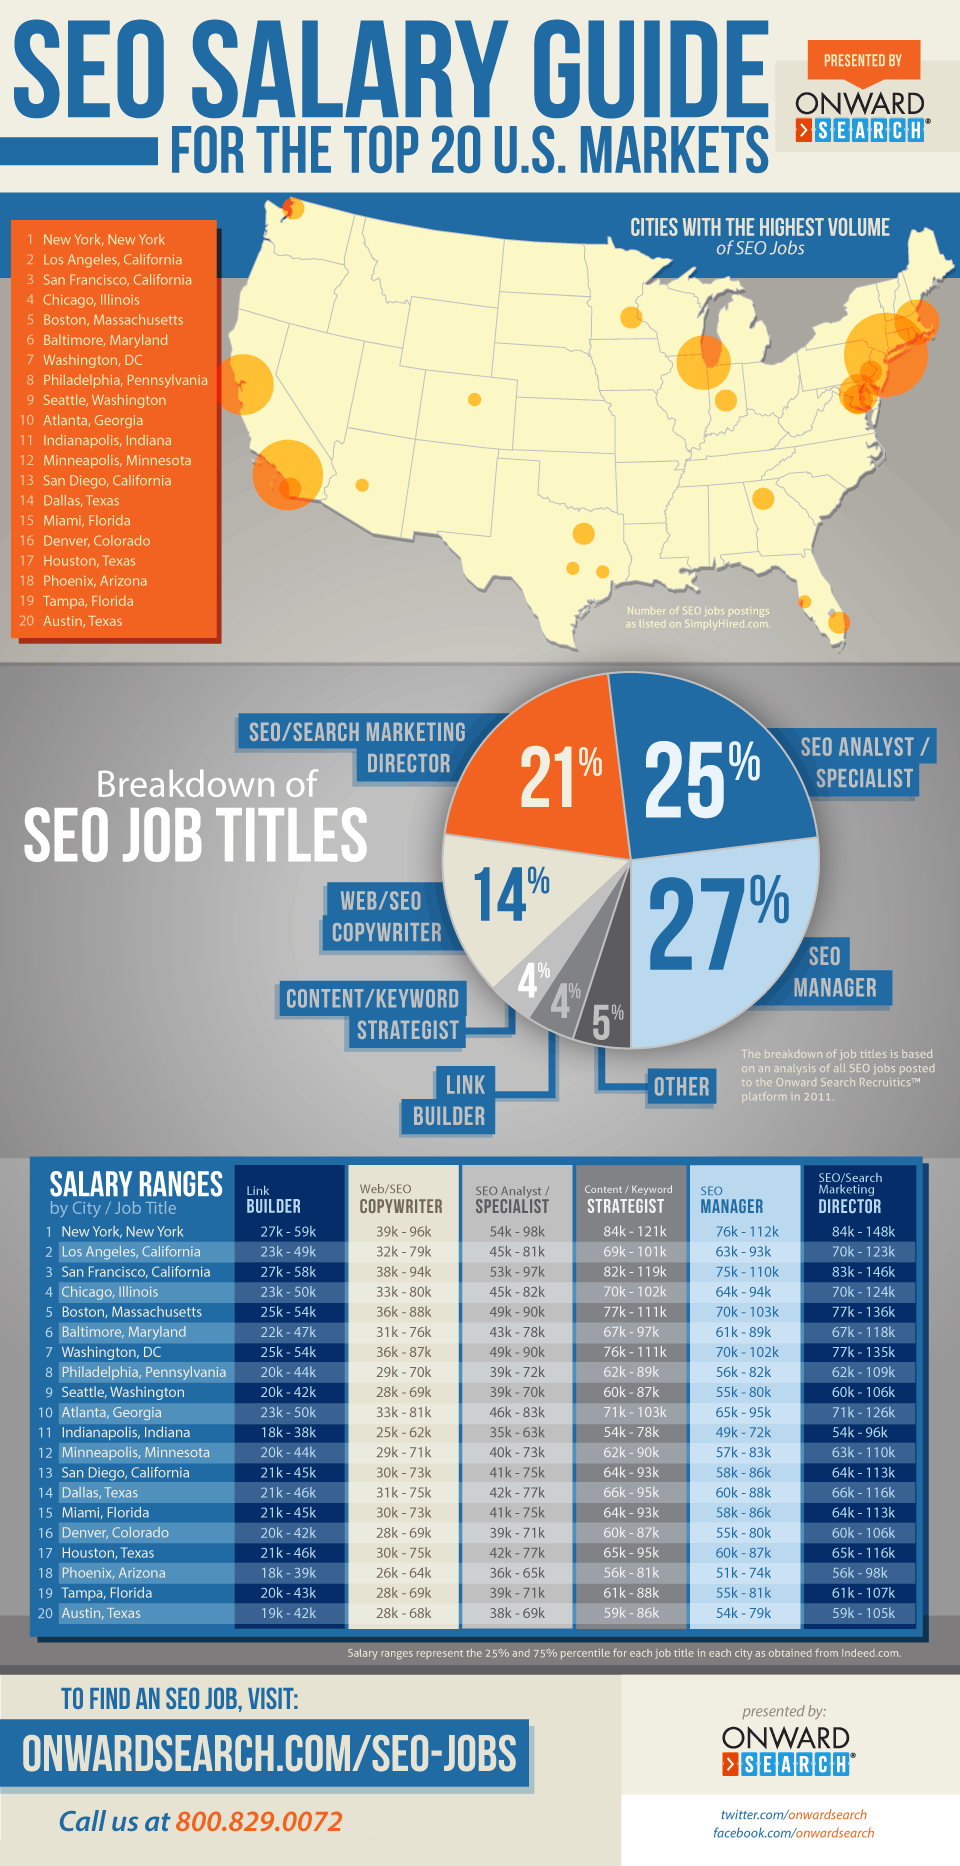 Dallas Among Top Cities for SEO Marketing Jobs and Salaries | Vizion Interactive